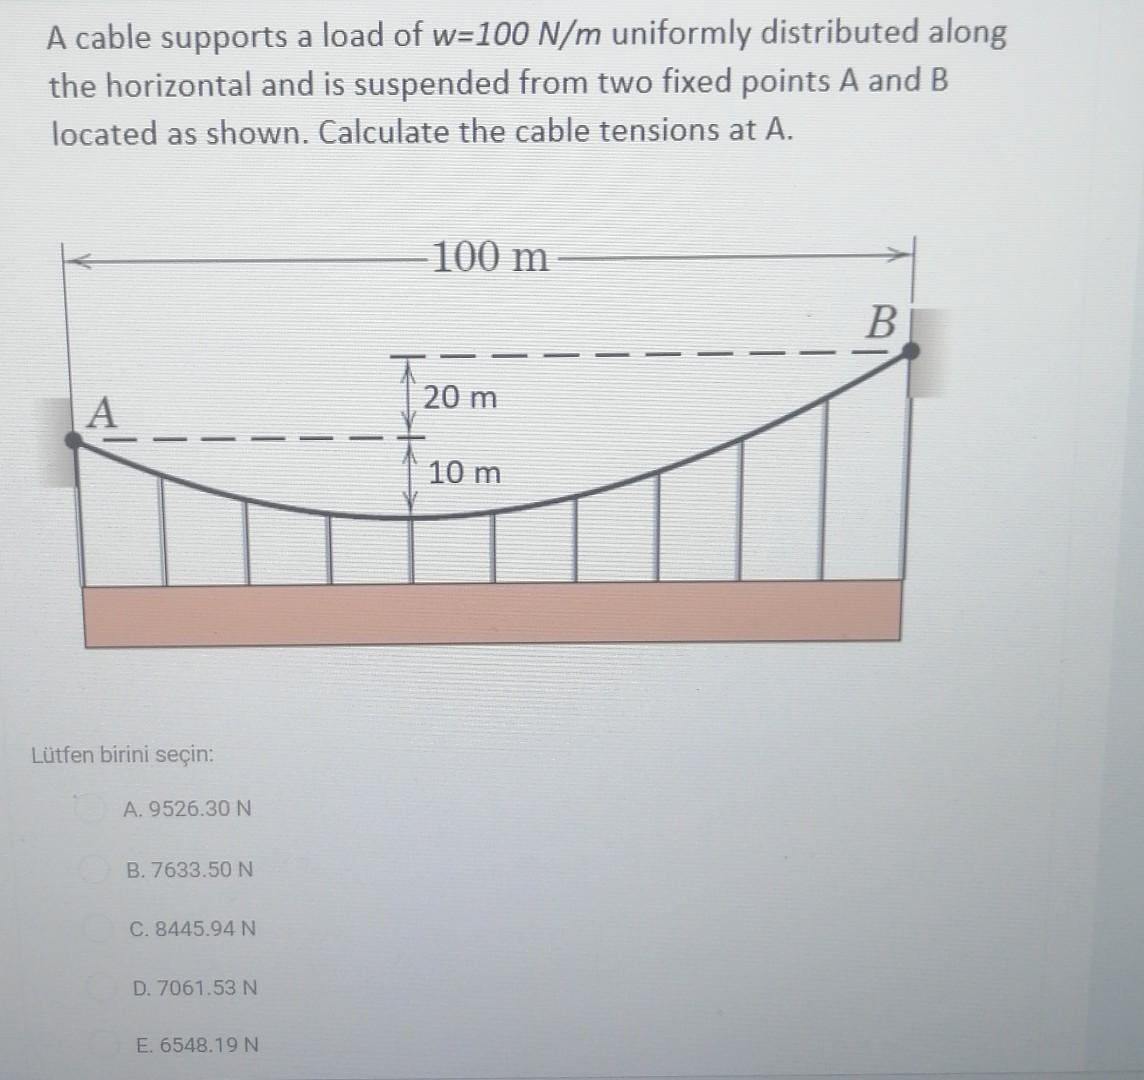 A cable supports a load of w=100 N/m uniformly distributed along
the horizontal and is suspended from two fixed points A and B
located as shown. Calculate the cable tensions at A.
Lütfen birini seçin:
A. 9526.30 N
B. 7633.50 N
C. 8445.94 N
D. 7061.53 N
E. 6548.19N
-100 m
20 m
10 m
B